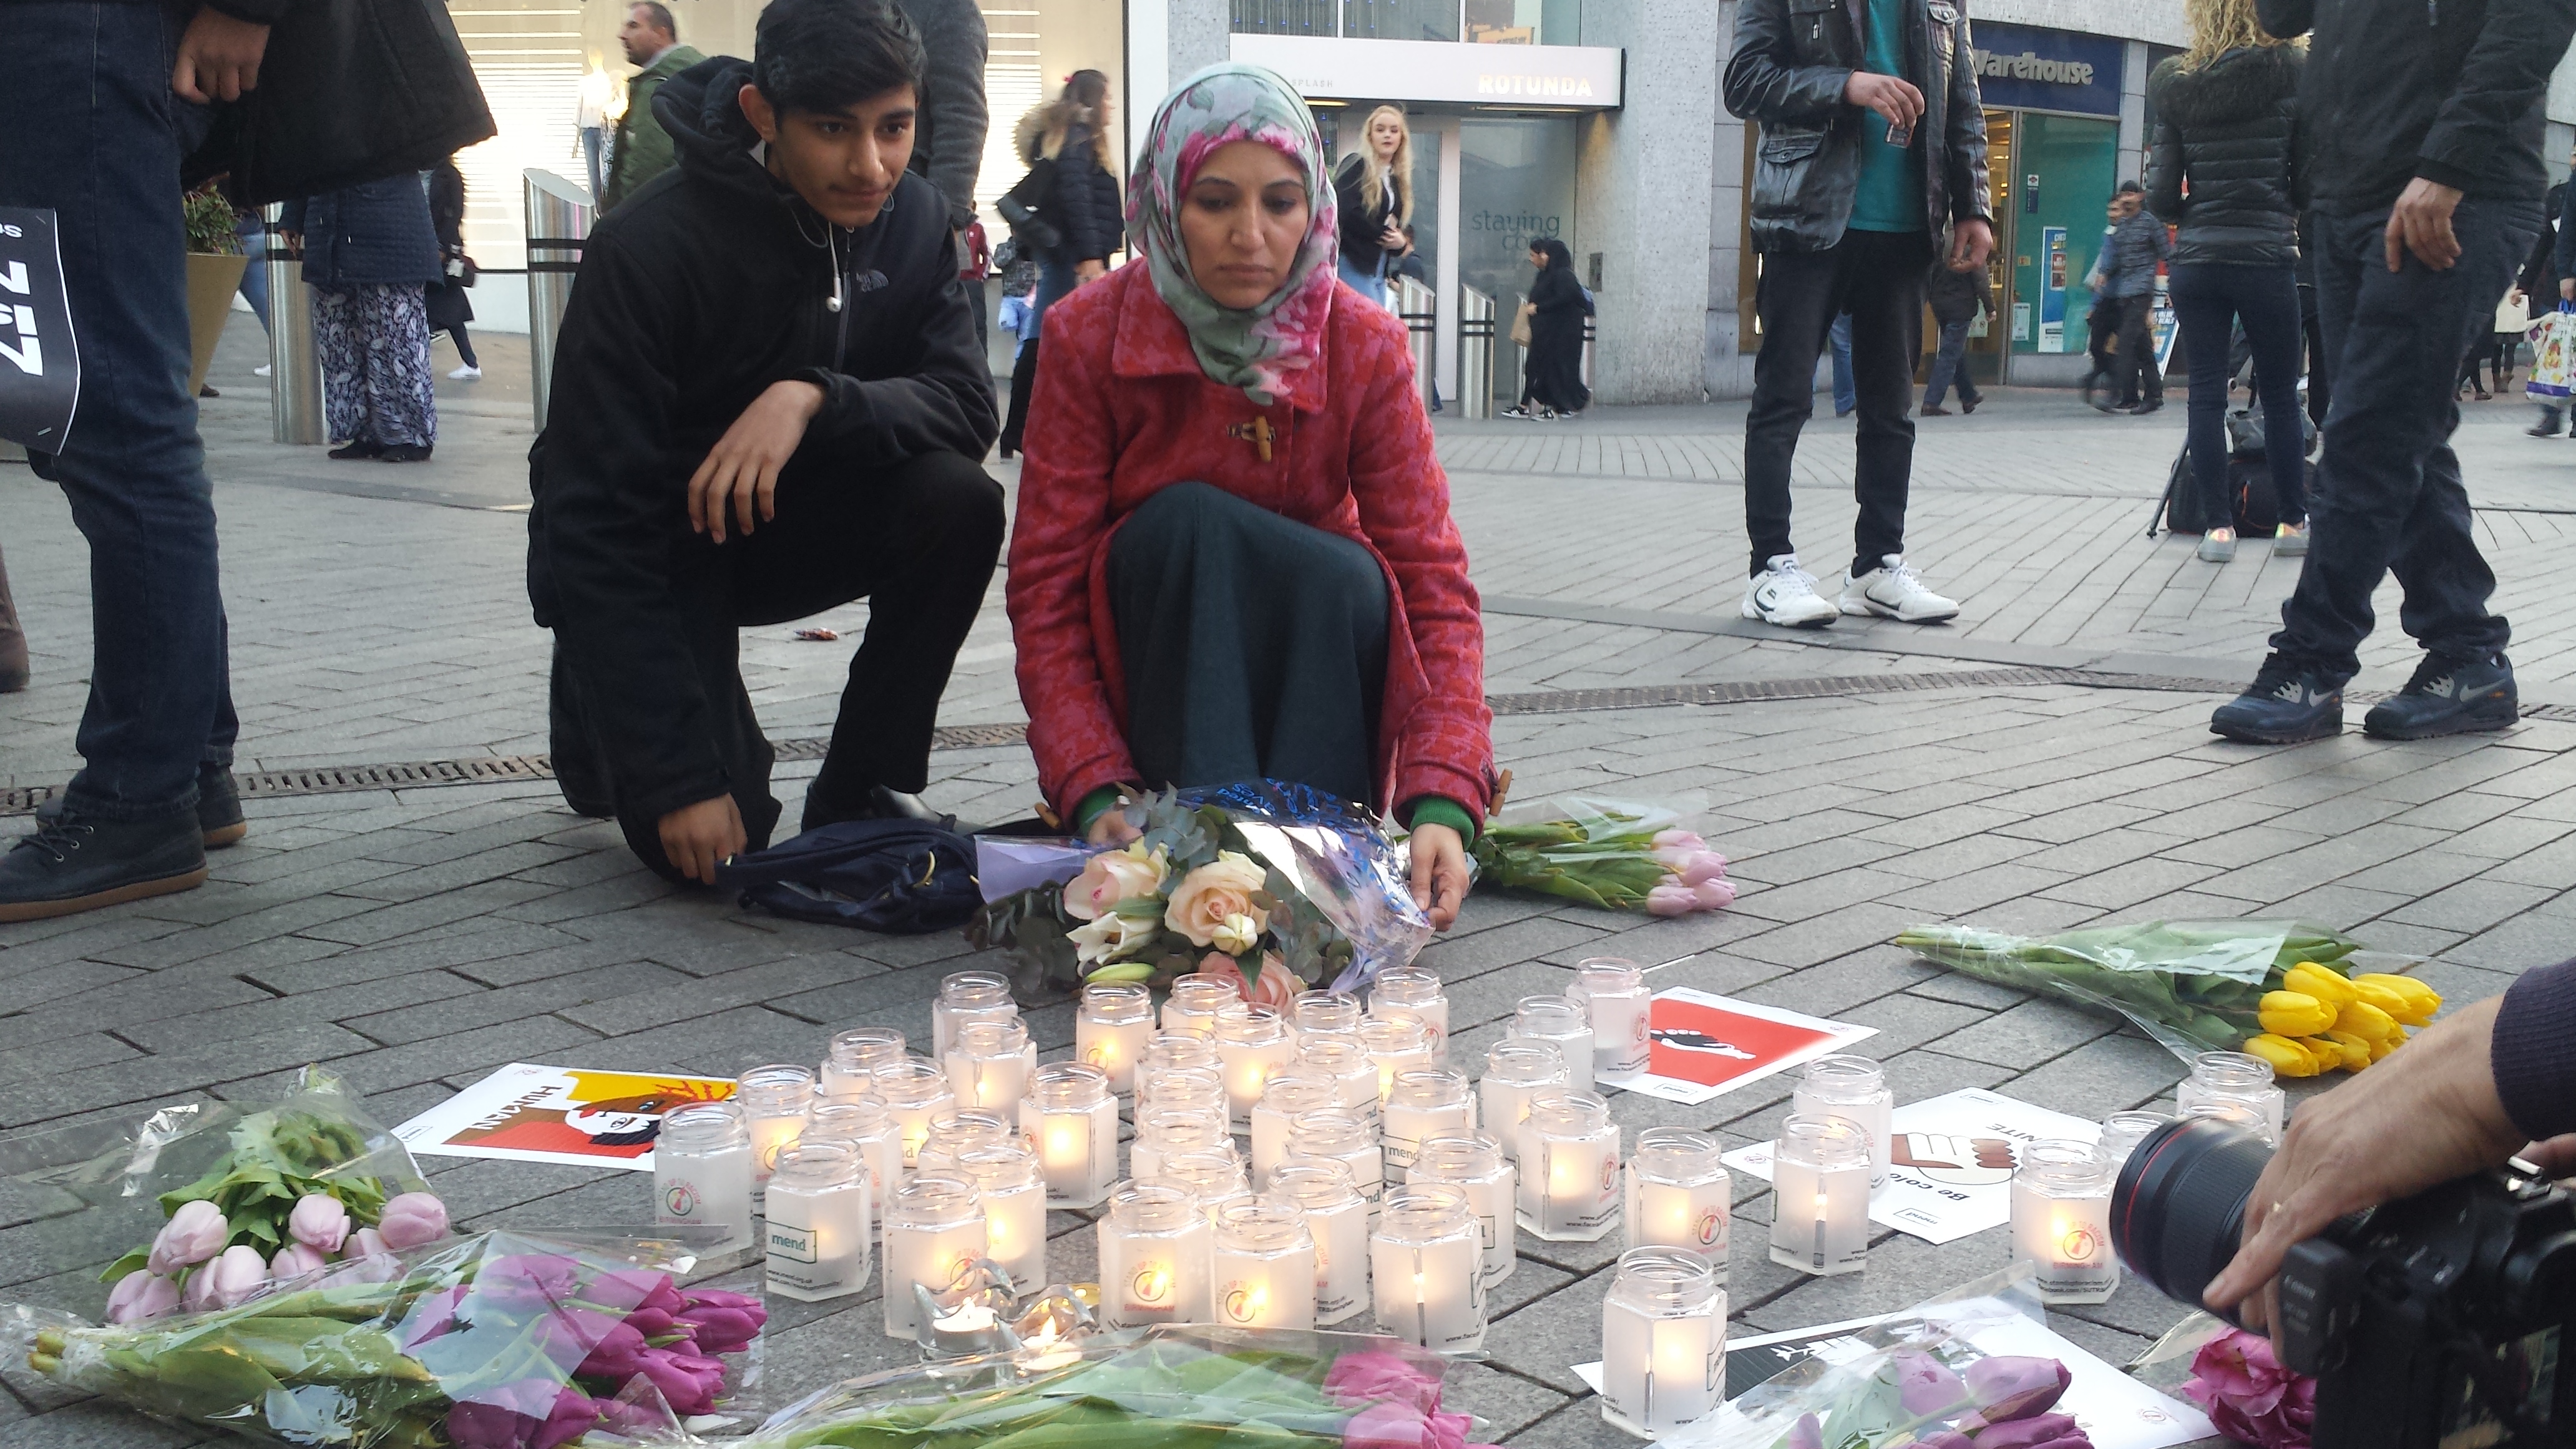 Birmingham anti-war campaigner and former city councillor Salma Yaqoob lays flowers during a vigil for the victims of the Westminster attacks in London (Photograph: Adam Yosef)